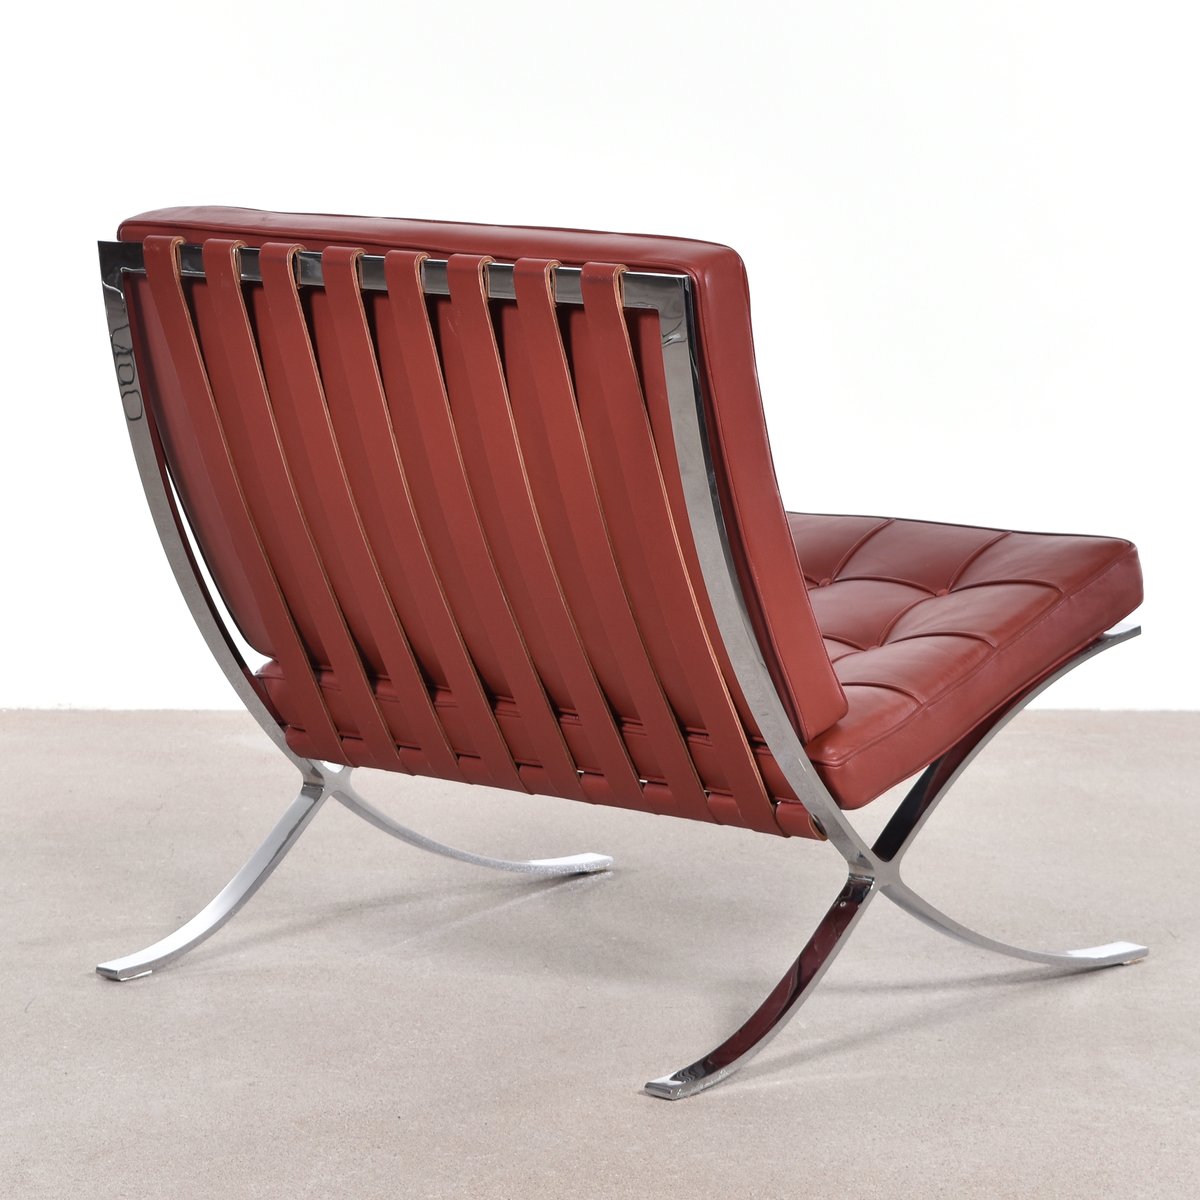 Barcelona Chair By Ludwig Mies Van Der Rohe For Knoll 4 